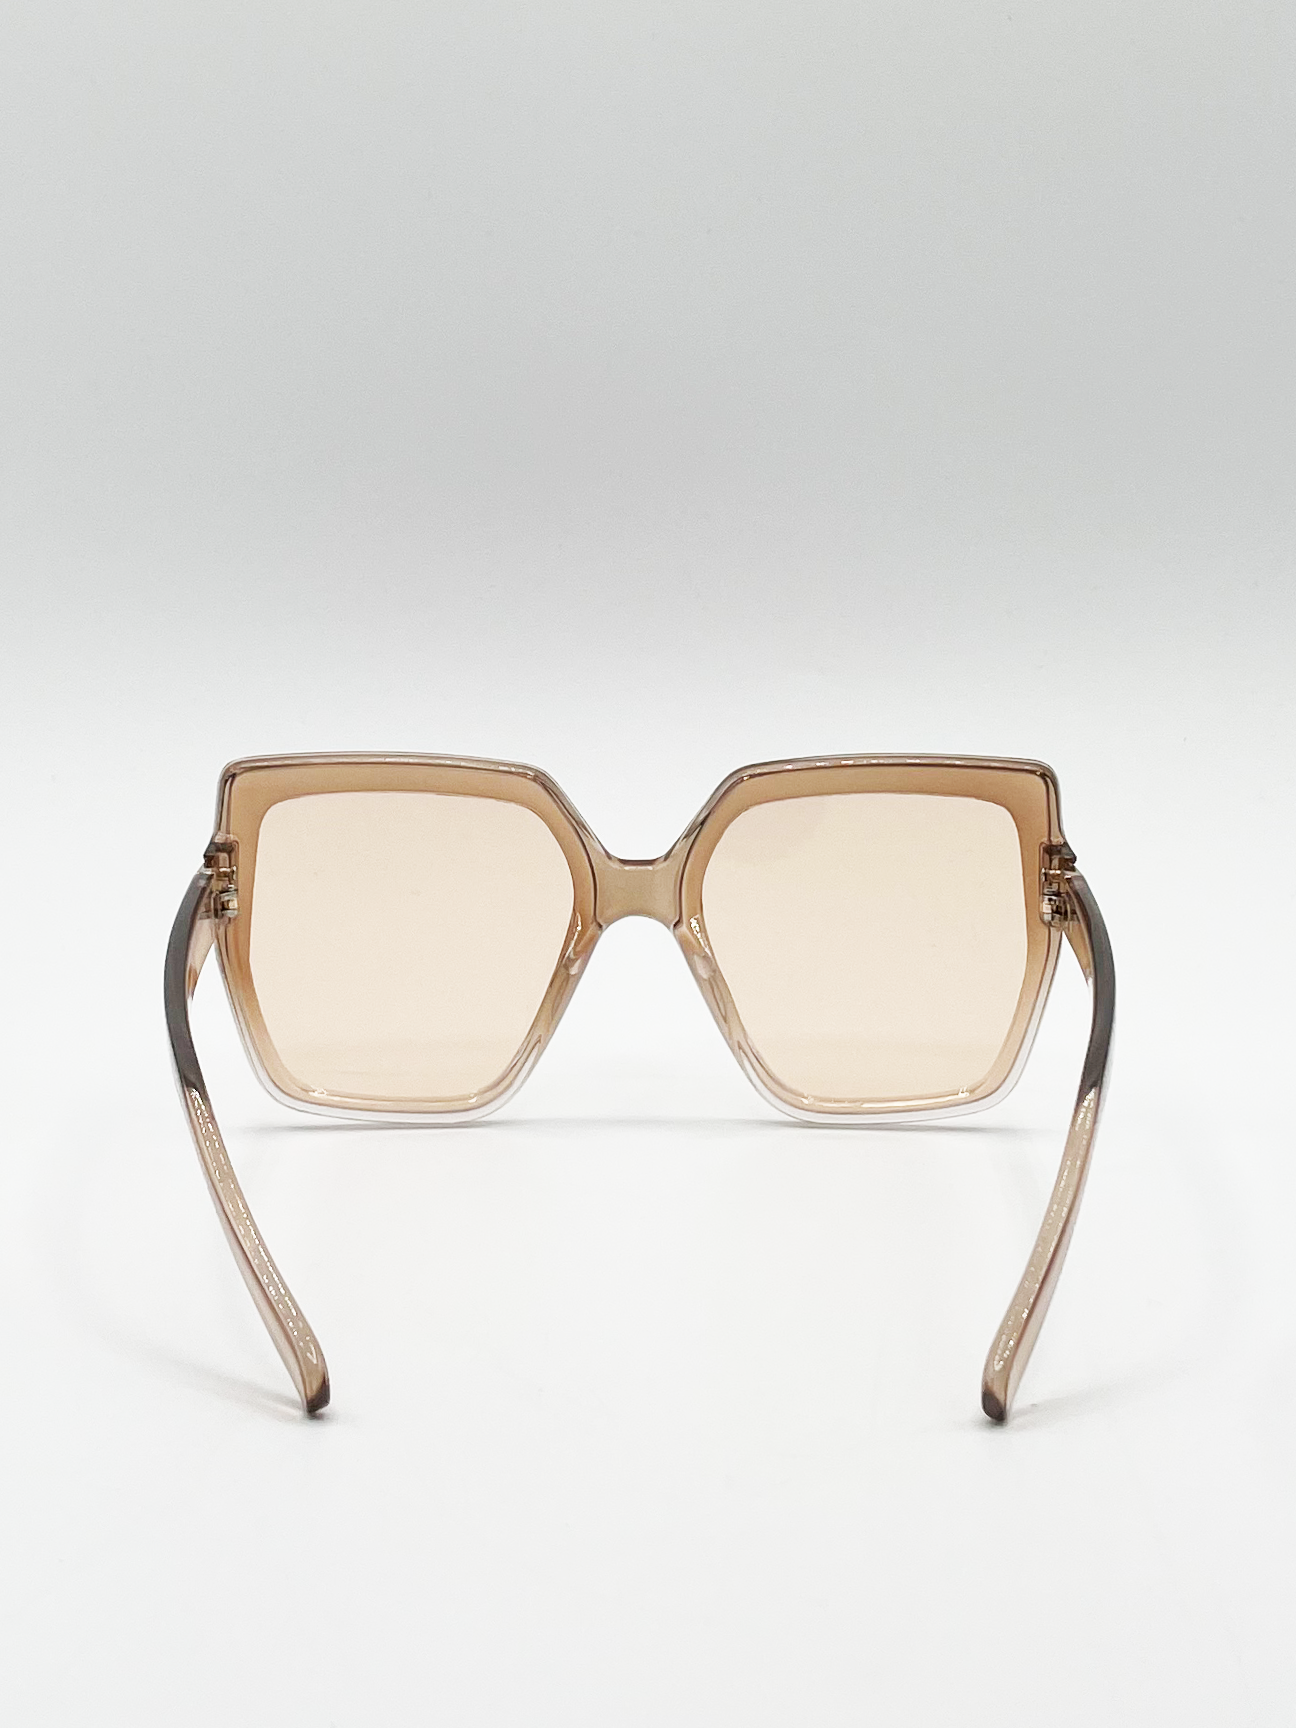 Oversize Cateye Sunglasses with Diamante Detail in Champagne